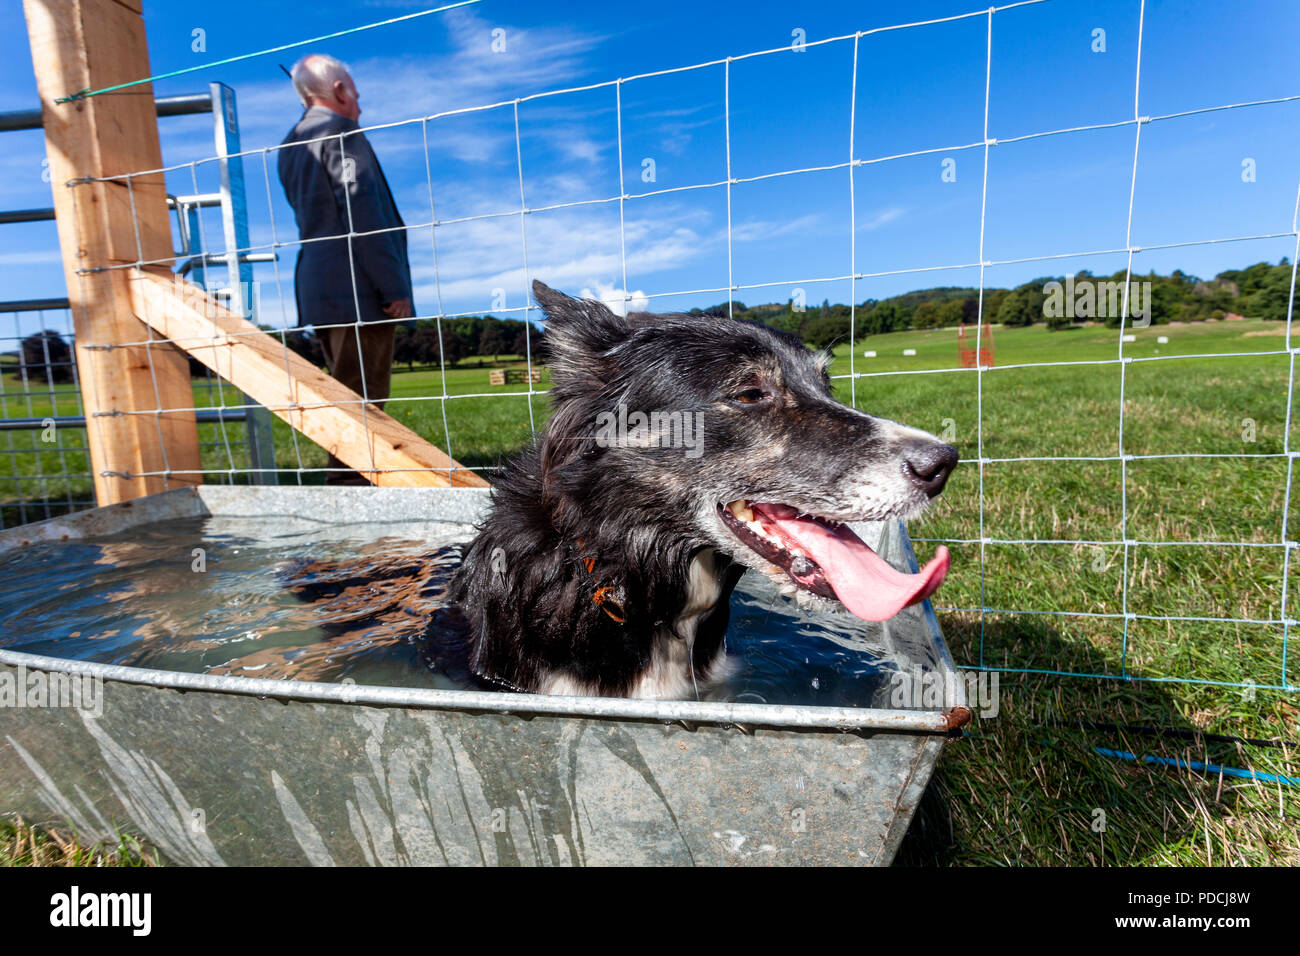 Nannerch, North Wales, UK Weather: Hot and sunny weather perfect for the Welsh National Sheep Dog Trials being held in the rural village of Nannerch at the Penbedw Estate in Flintshire. A sheep dog  called Brenig Taran relaxing in the cold water provided for the dogs to cool down after competing at the National Sheep Dog Trials in the hot weather, Nannerch, Flintshire Stock Photo